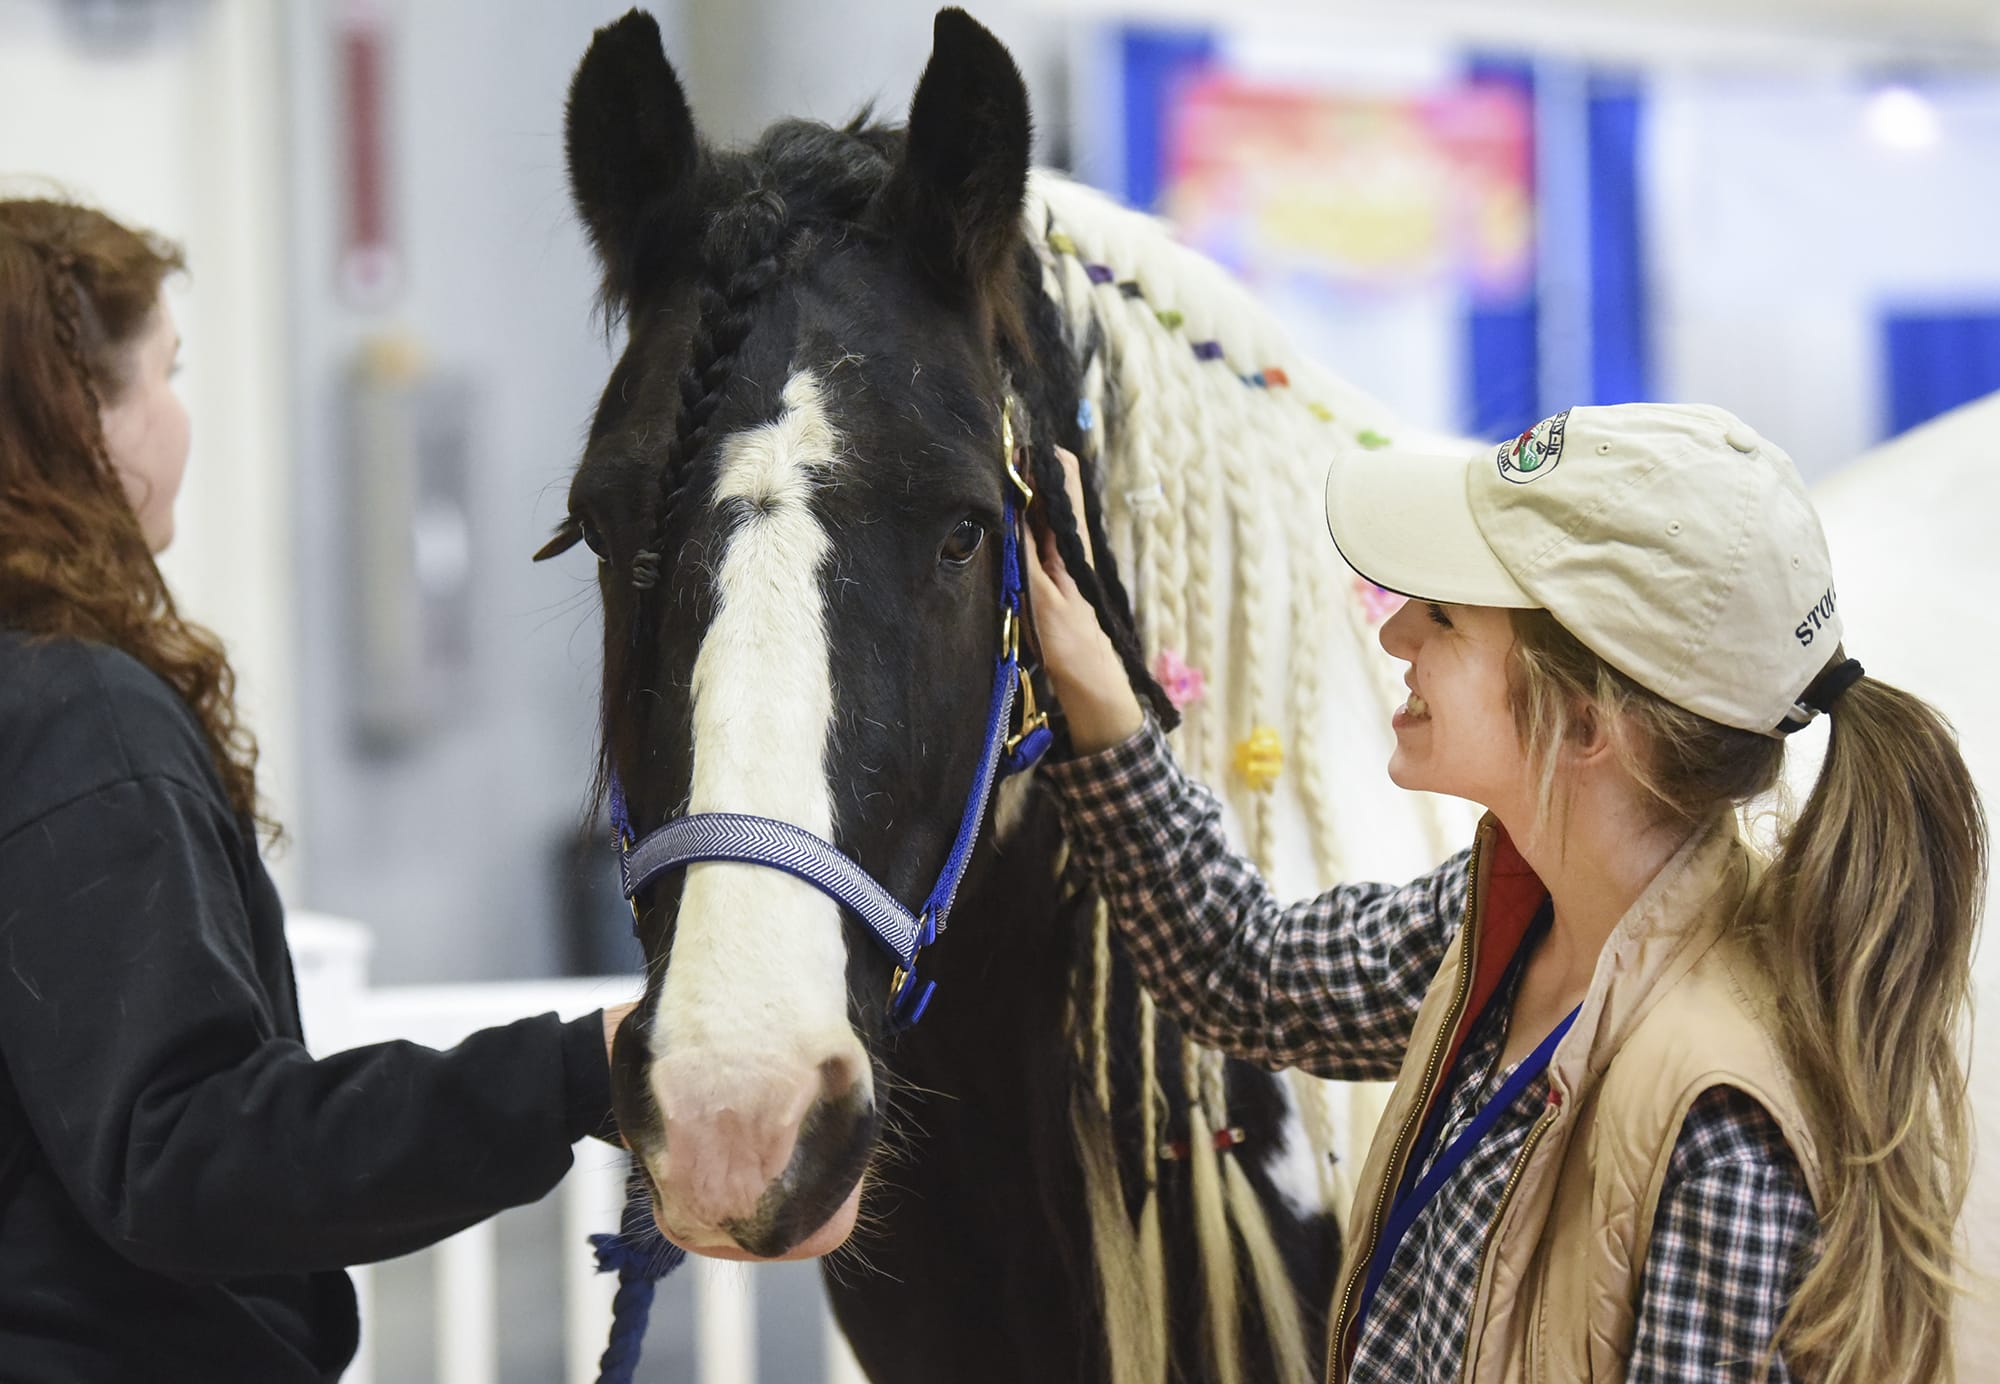 Megan Webb, 26, of Portland, pets Jille, a nine-year-old Gypsy Drum Horse at the Washington State Horse Expo at the Clark County Event Center, Friday March 2, 2018.